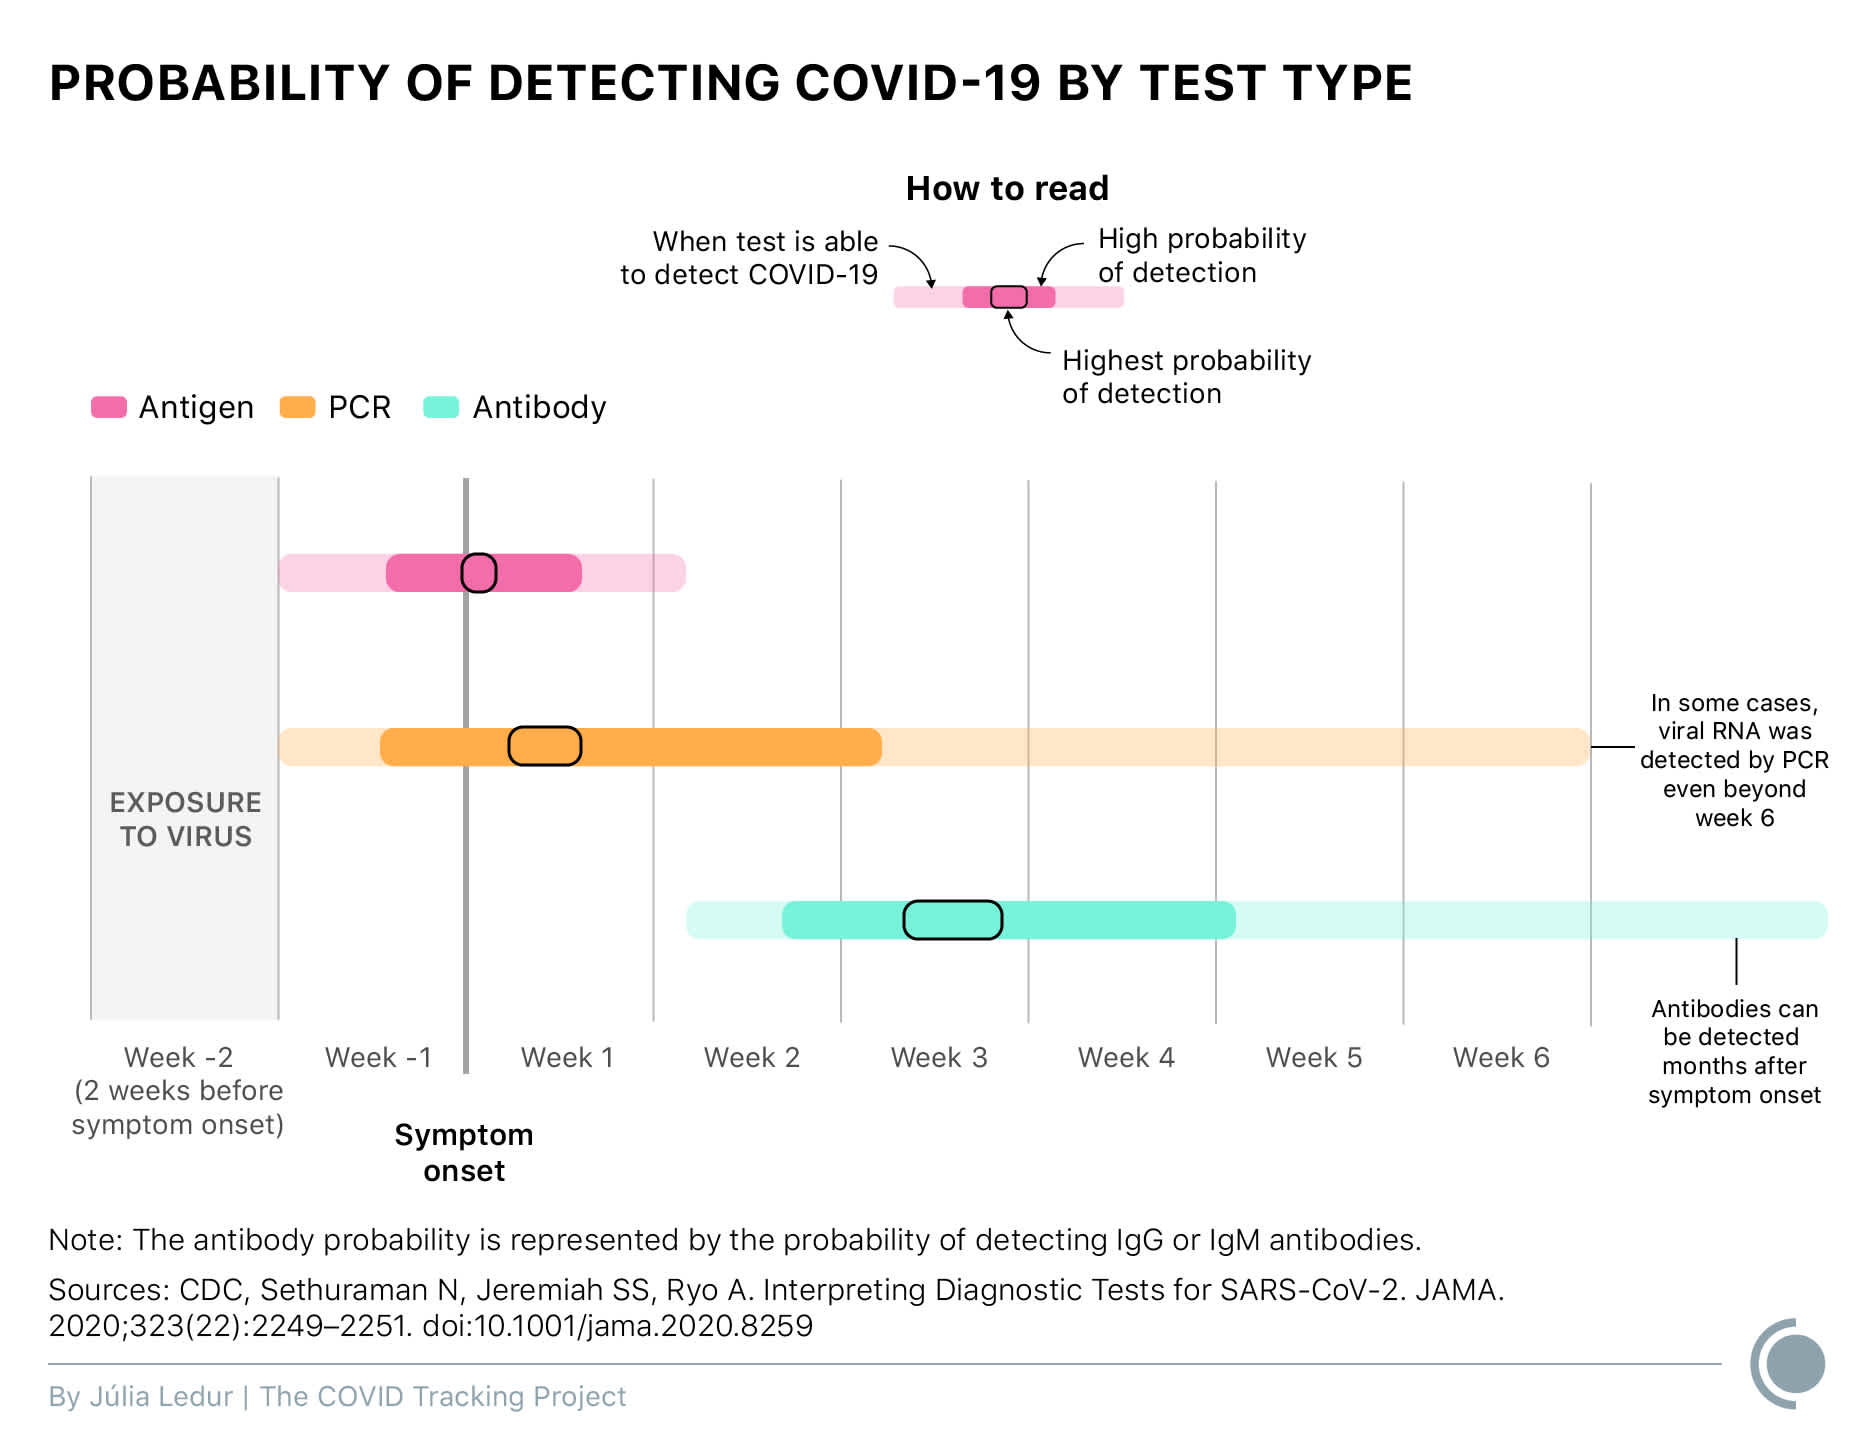 graphic shows the probability of detecting COVID-19 with an antigen, PCR and antibody test. Antigen tests can detect the virus from the week prior to symptom onset to a week after symptom onset (probability is higher immediately after symptom onset). PCR tests can detect the virus from the week prior to symptom onset to up to more six weeks after symptom onset (probability is higher a few days after symptom onset). Antibody tests can detect the virus from about 10 days after symptom onset (probability is higher about three weeks after symptom onset). Antibodies can be detected in someone's blood sample month's after infection.